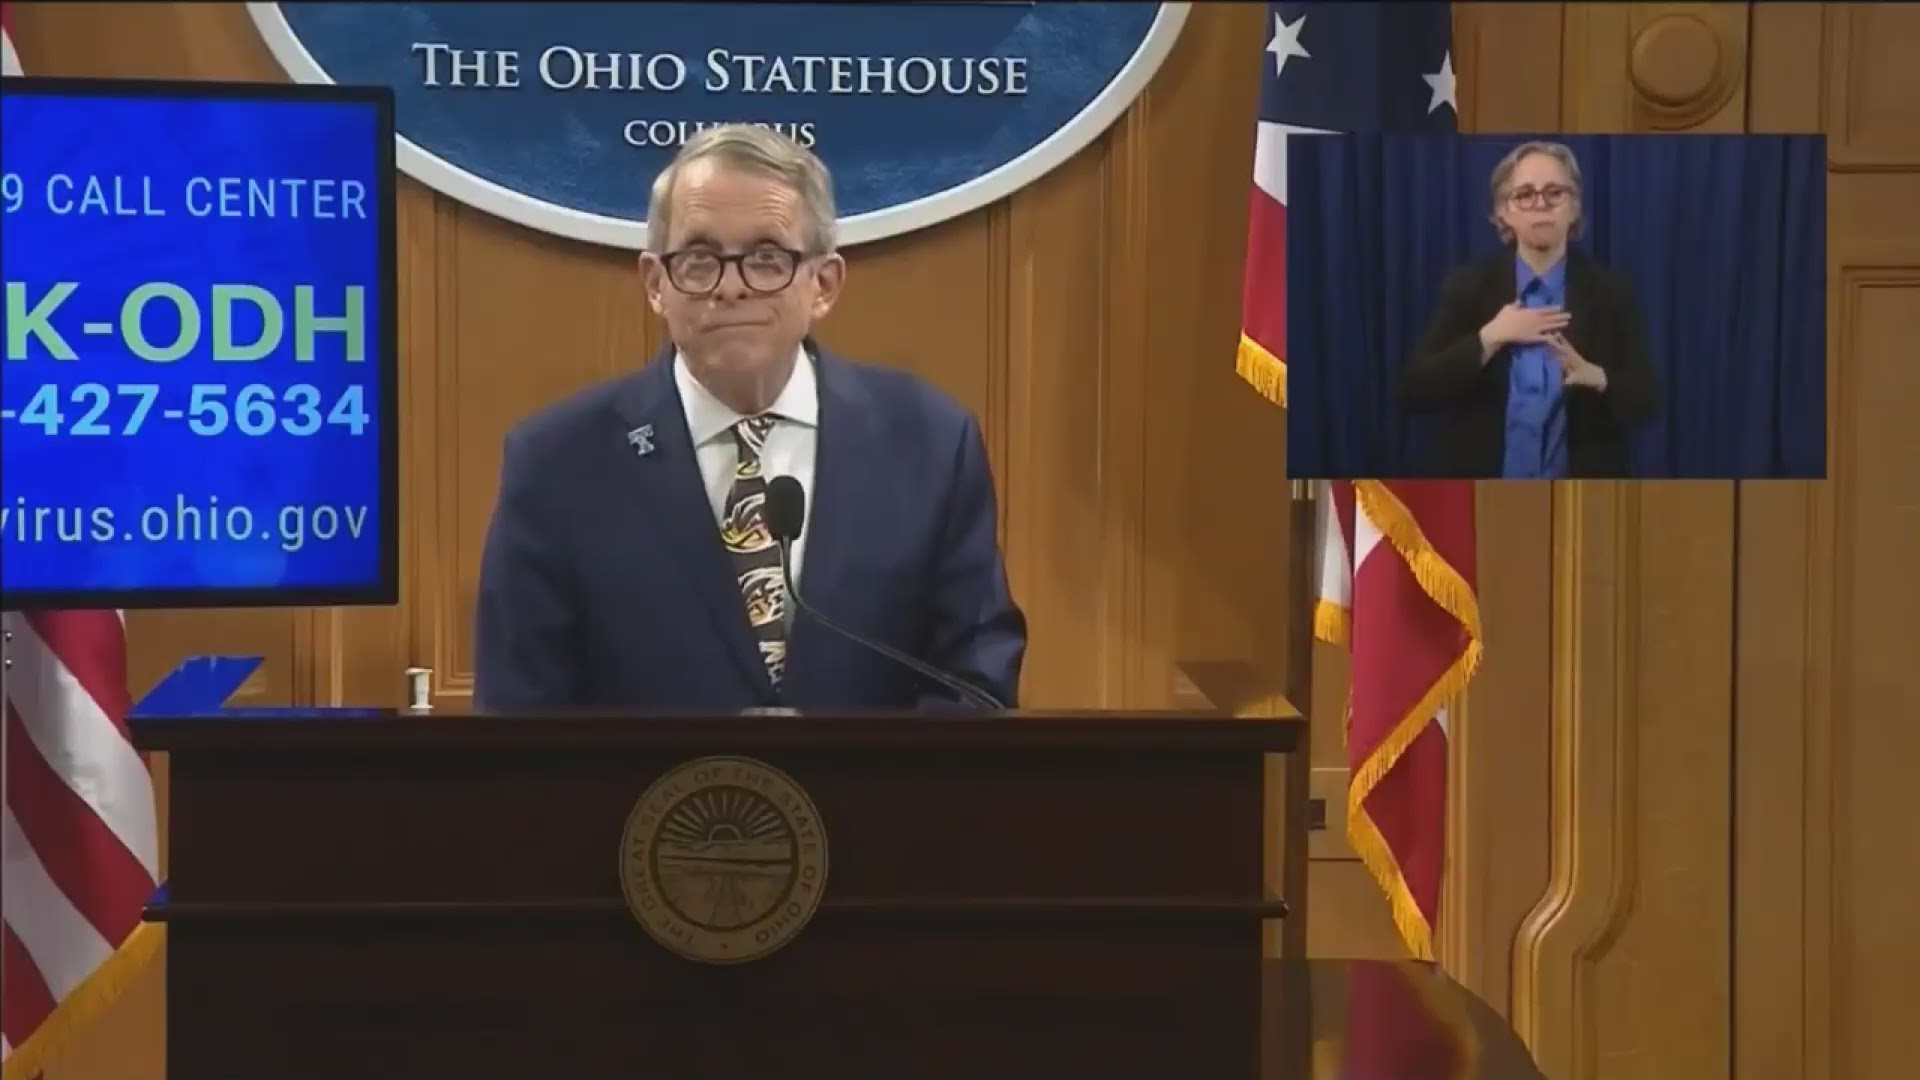 When asked to address concerned parents during his press conference April 17, Gov. DeWine offered this message about his soon-to-be-announced plan for K-12 schools.